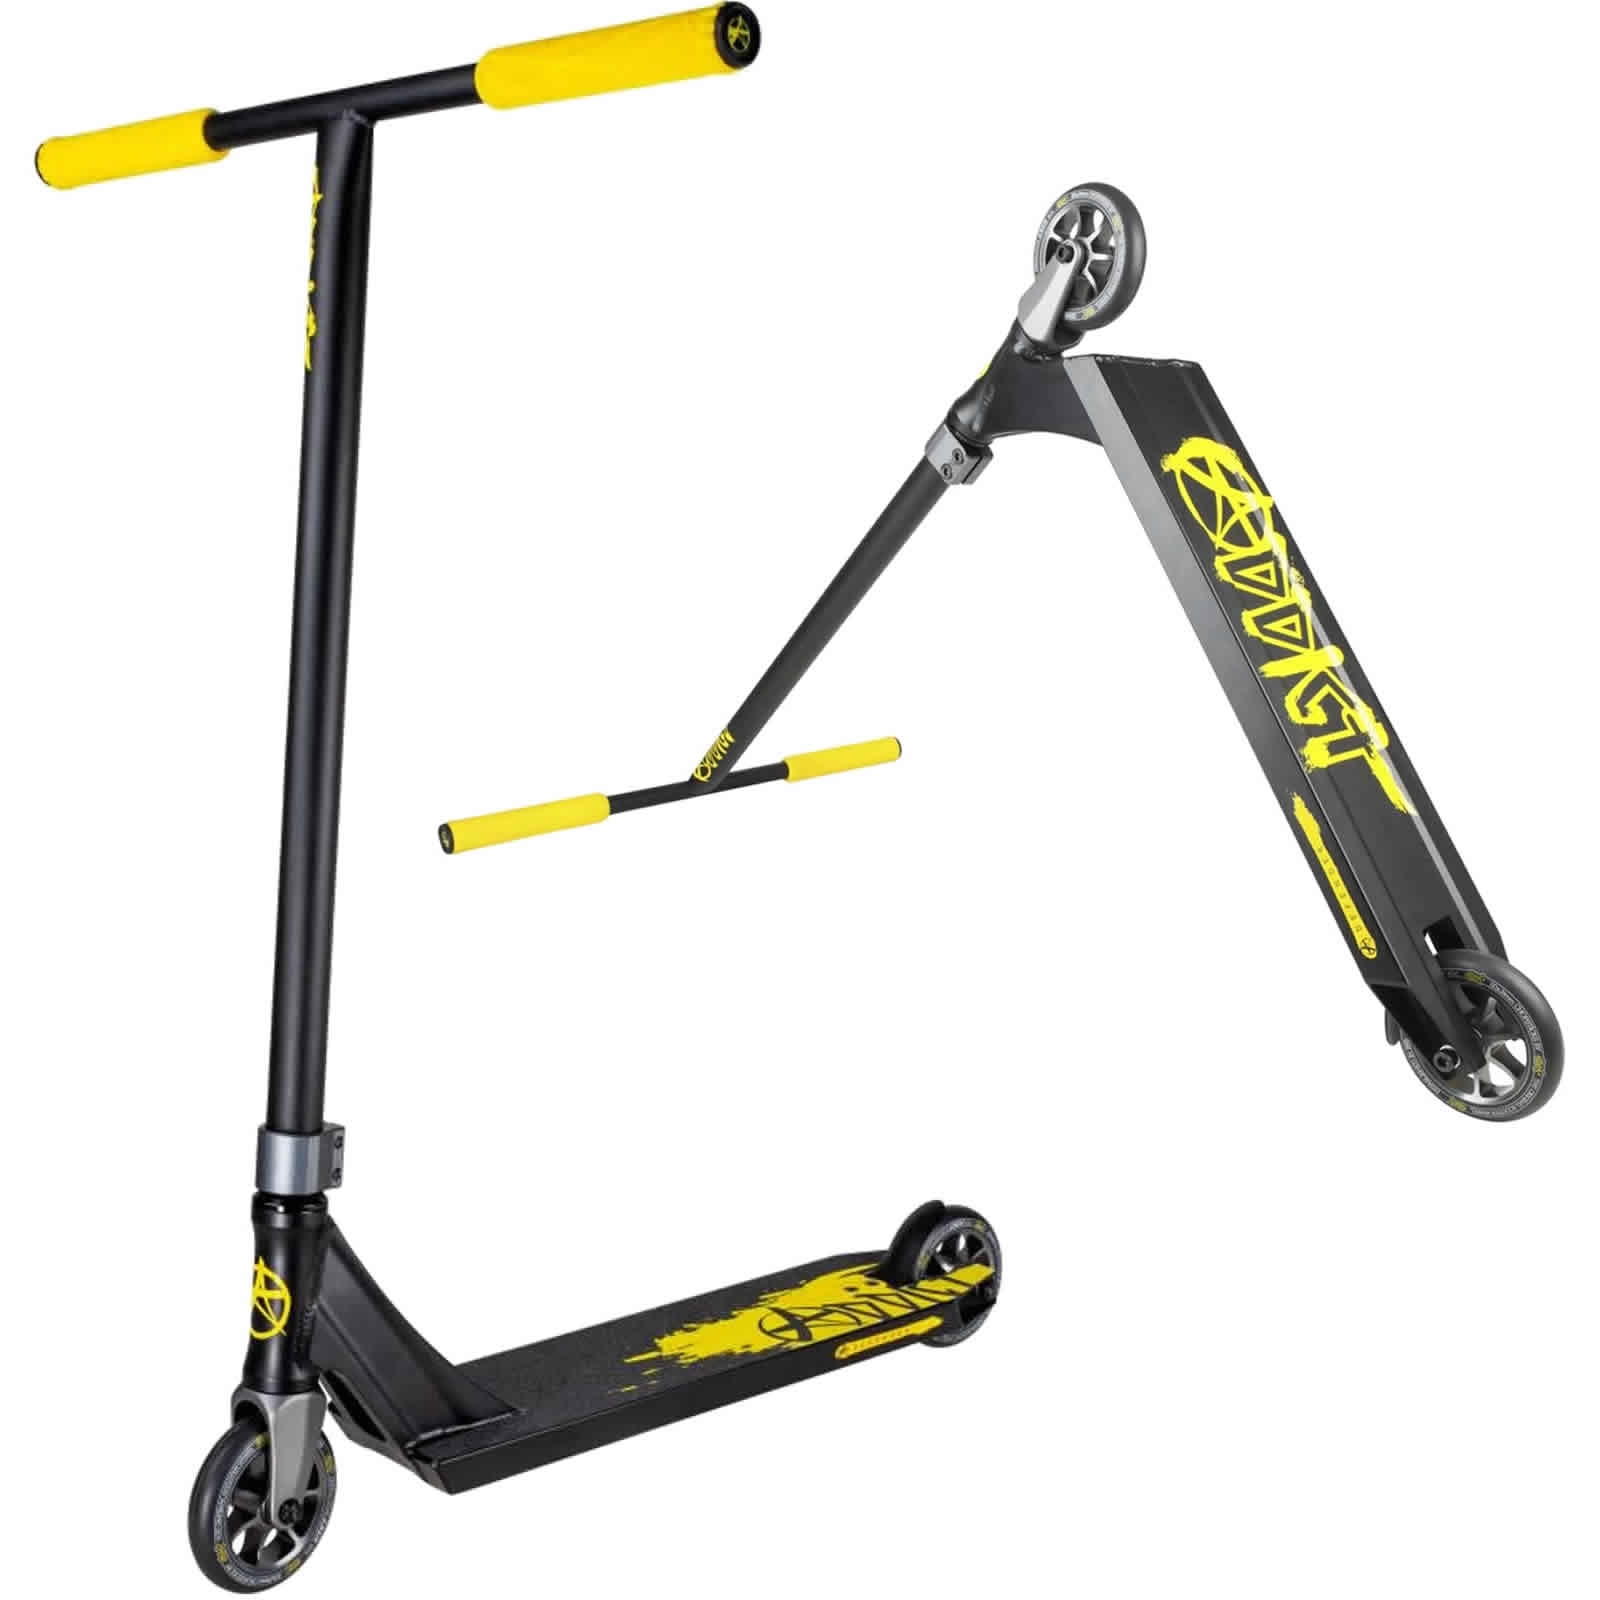 An image of Addict Defender MKII Pro Stunt Scooter - Black / Yellow